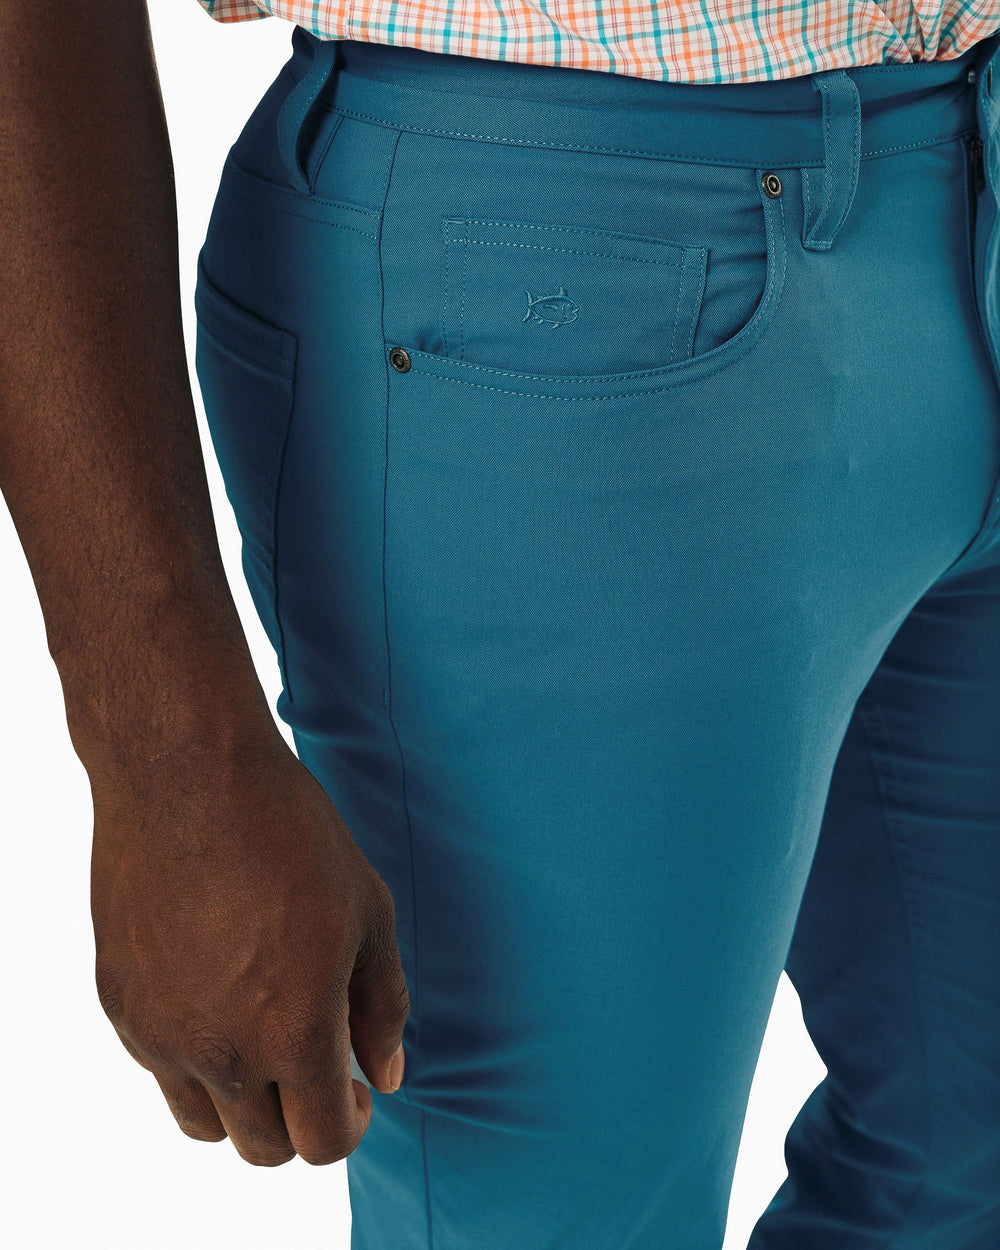 The side model view of the Men's Intercoastal Pant by Southern Tide - Porto Blue